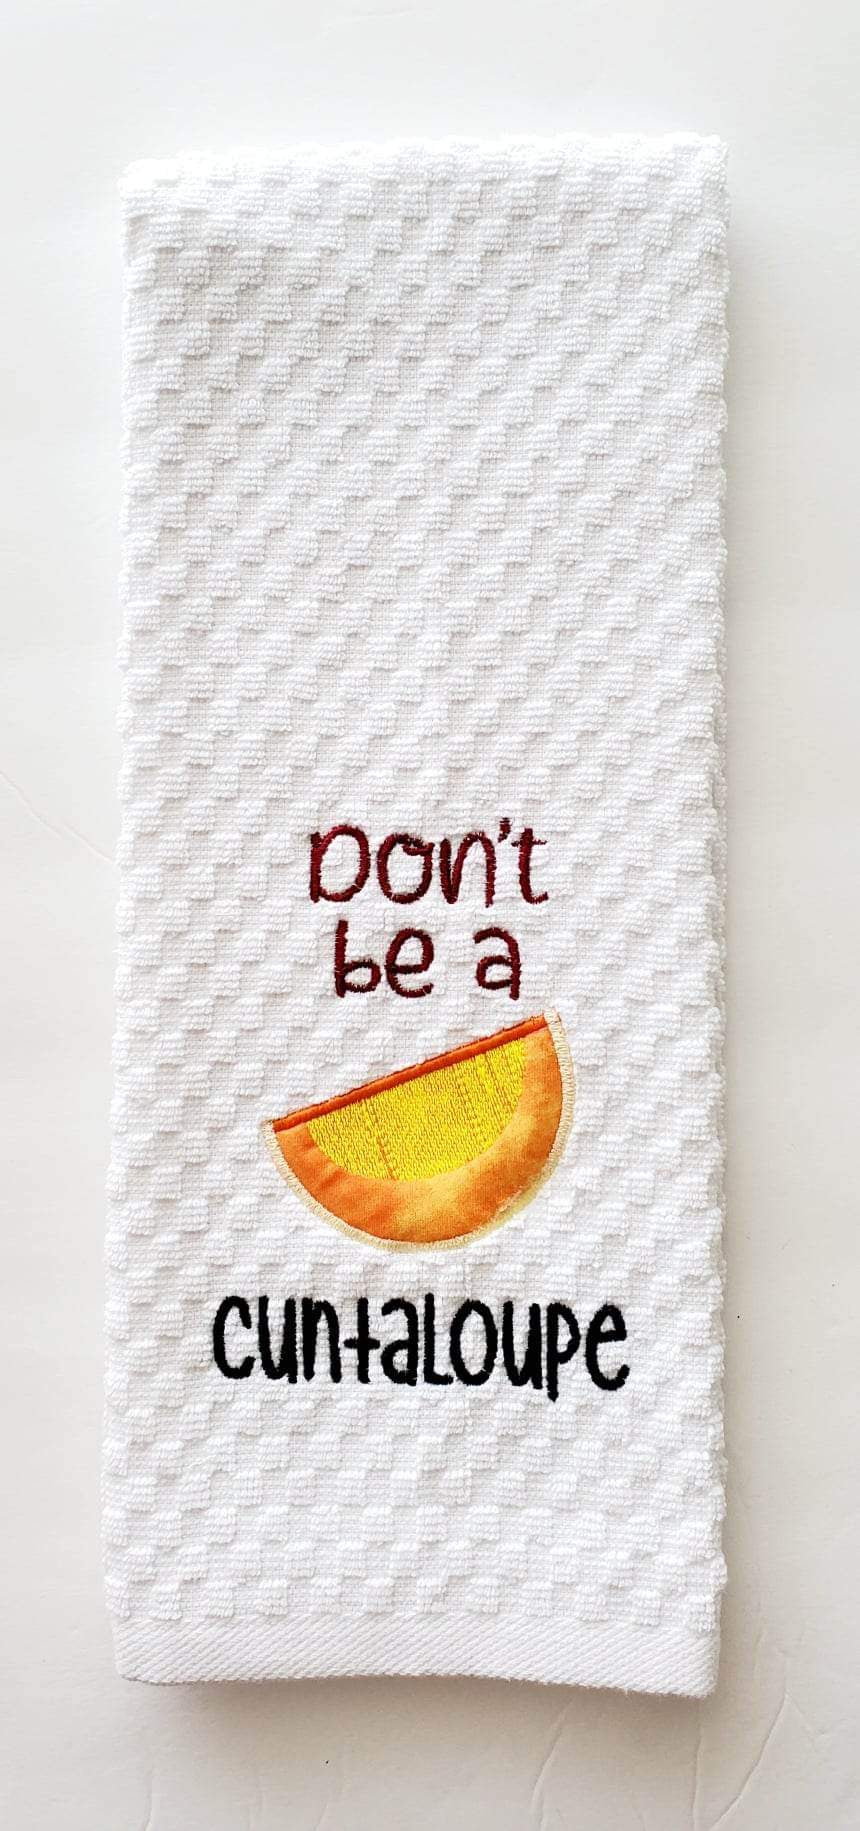 Don’t be a Cuntaloupe kitchen towel